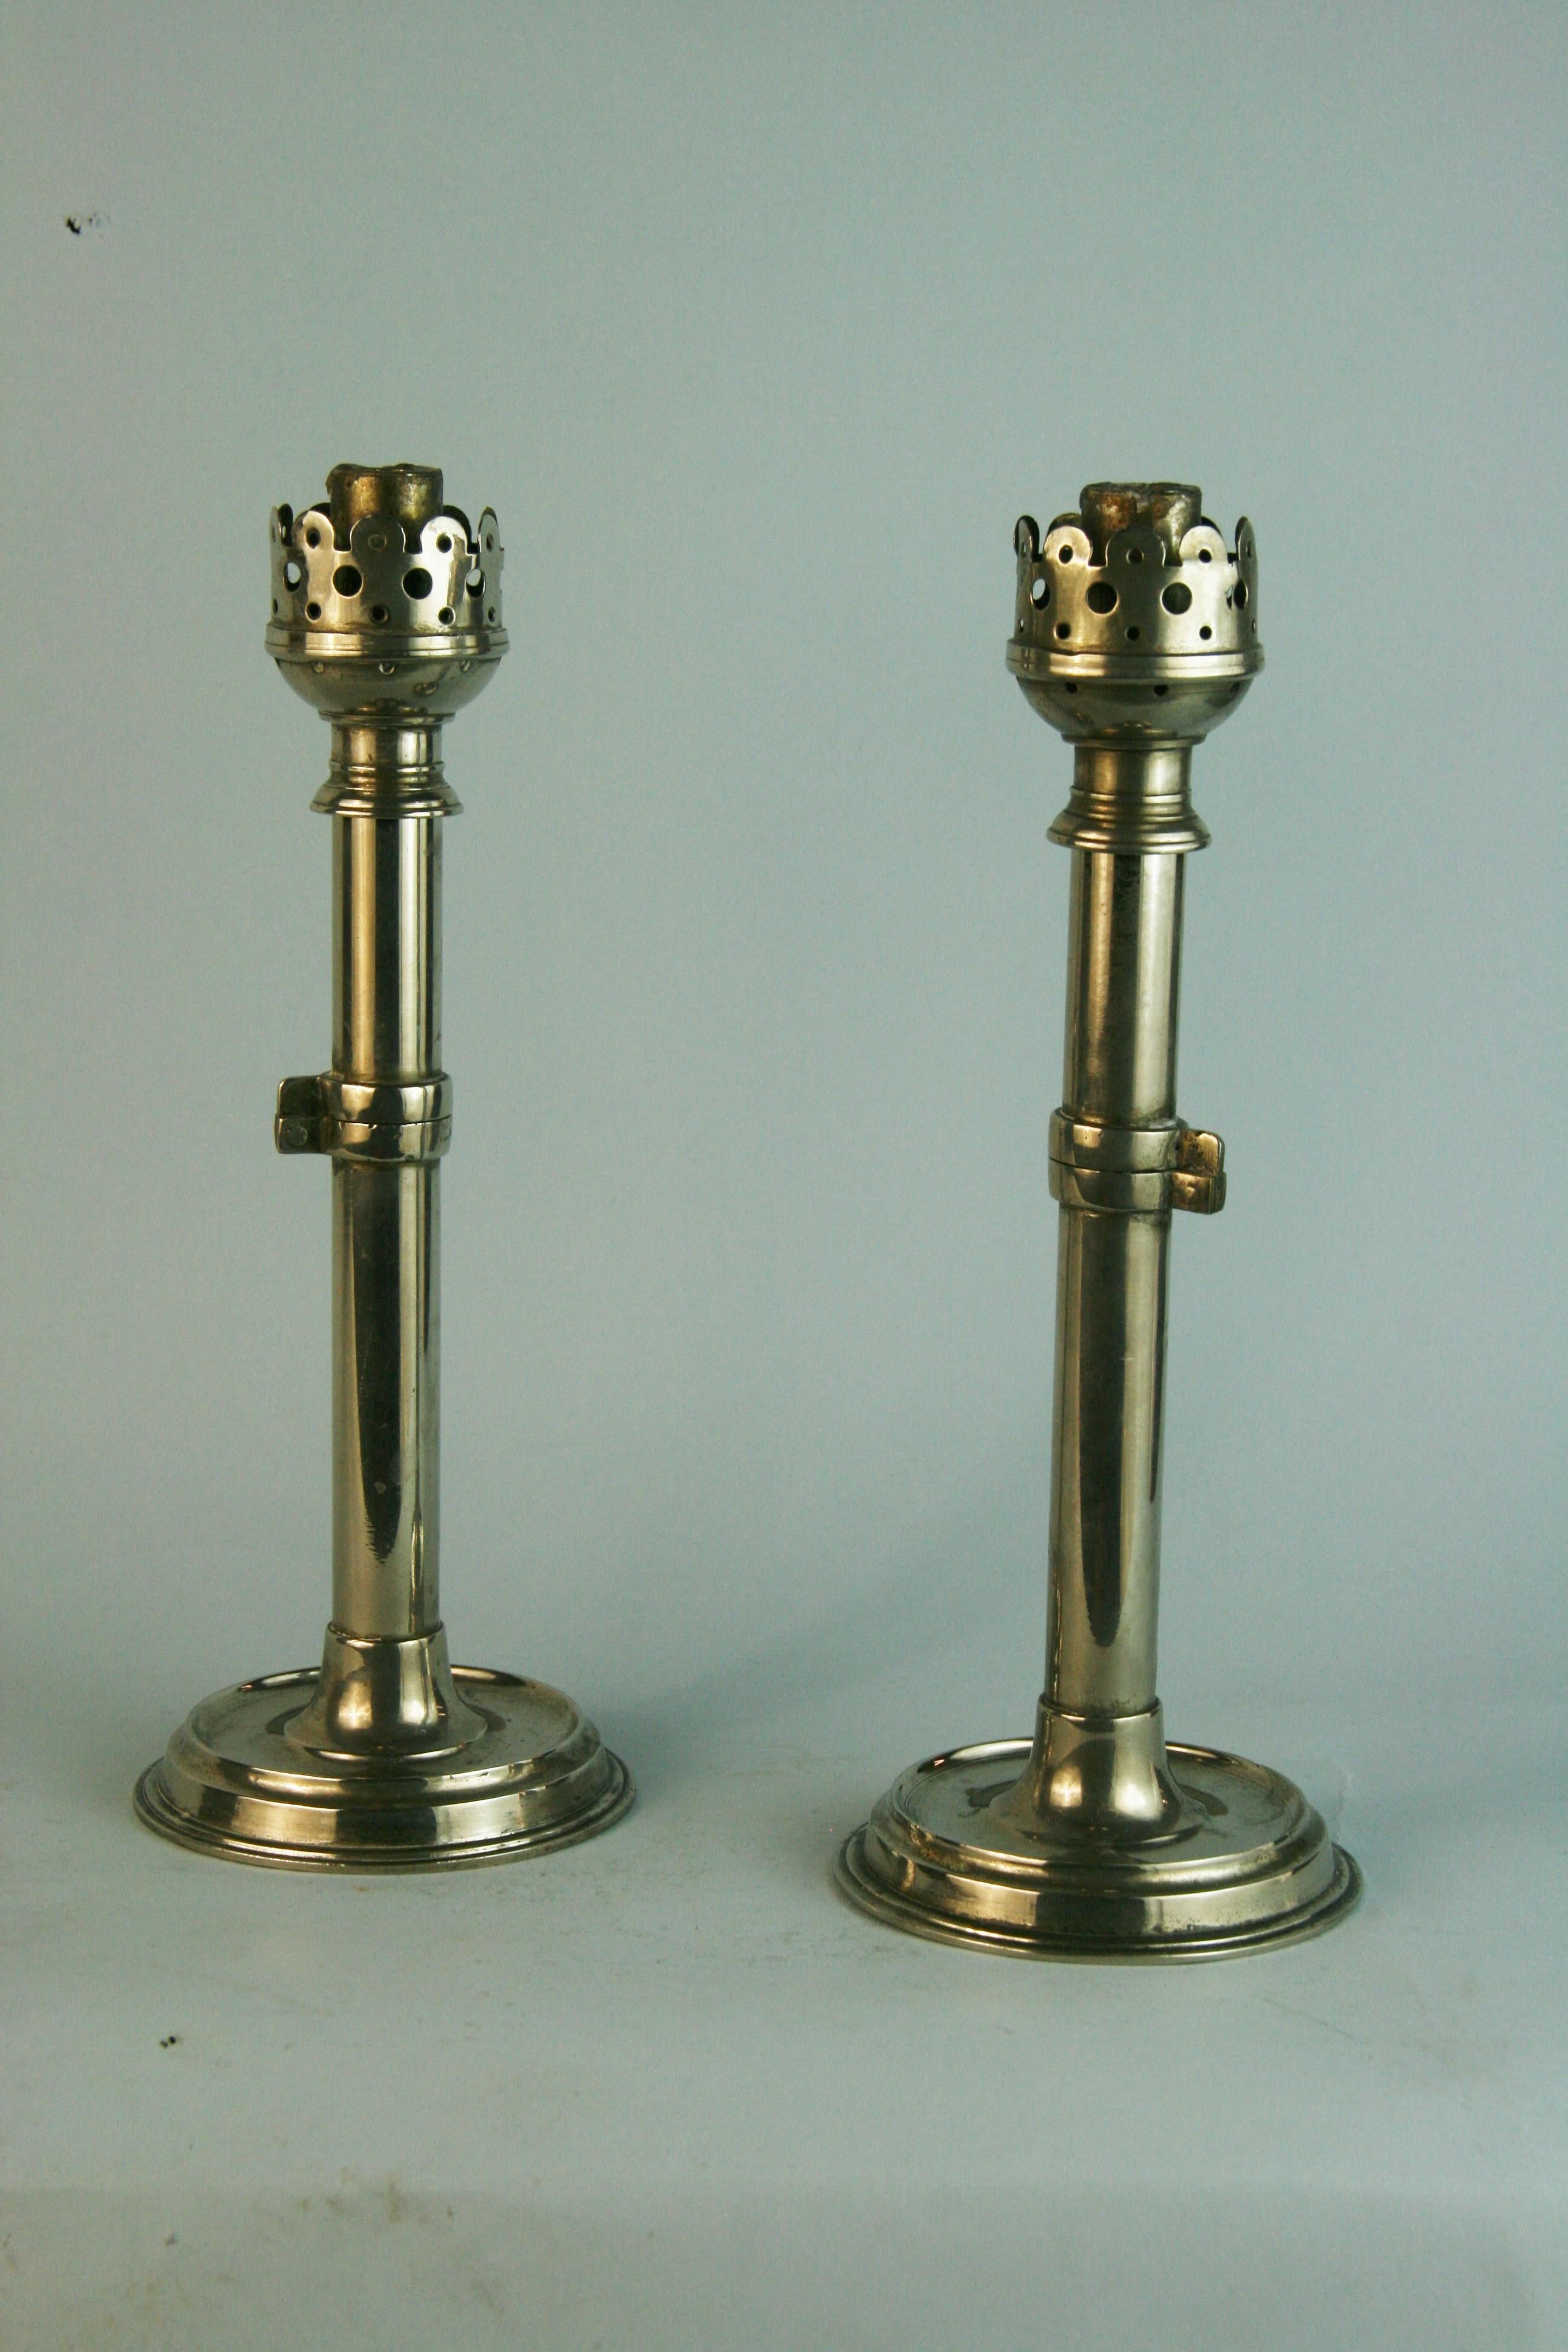 1367 Pair spring loaded candle holders that can be converted to wall candle sconces
Candle is set in a spring loaded cylinder.